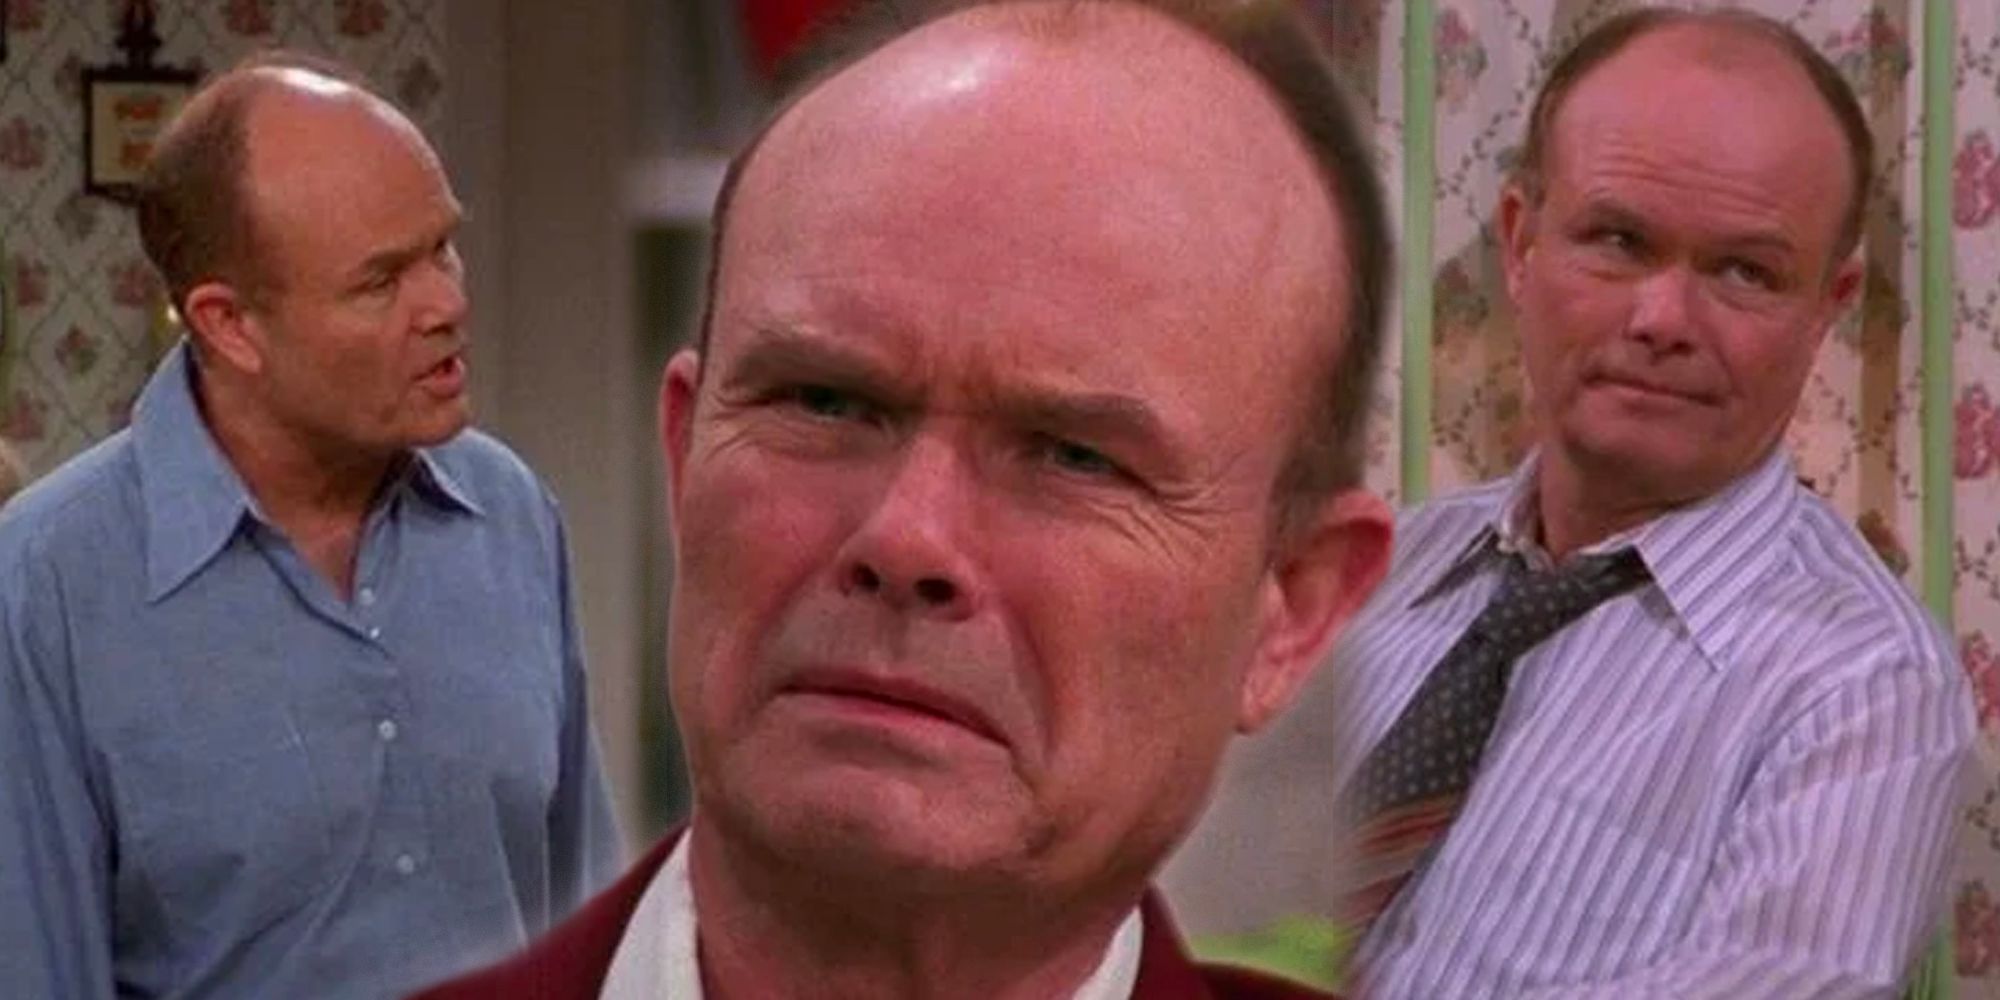 A collage of Red Forman from That 70s Show